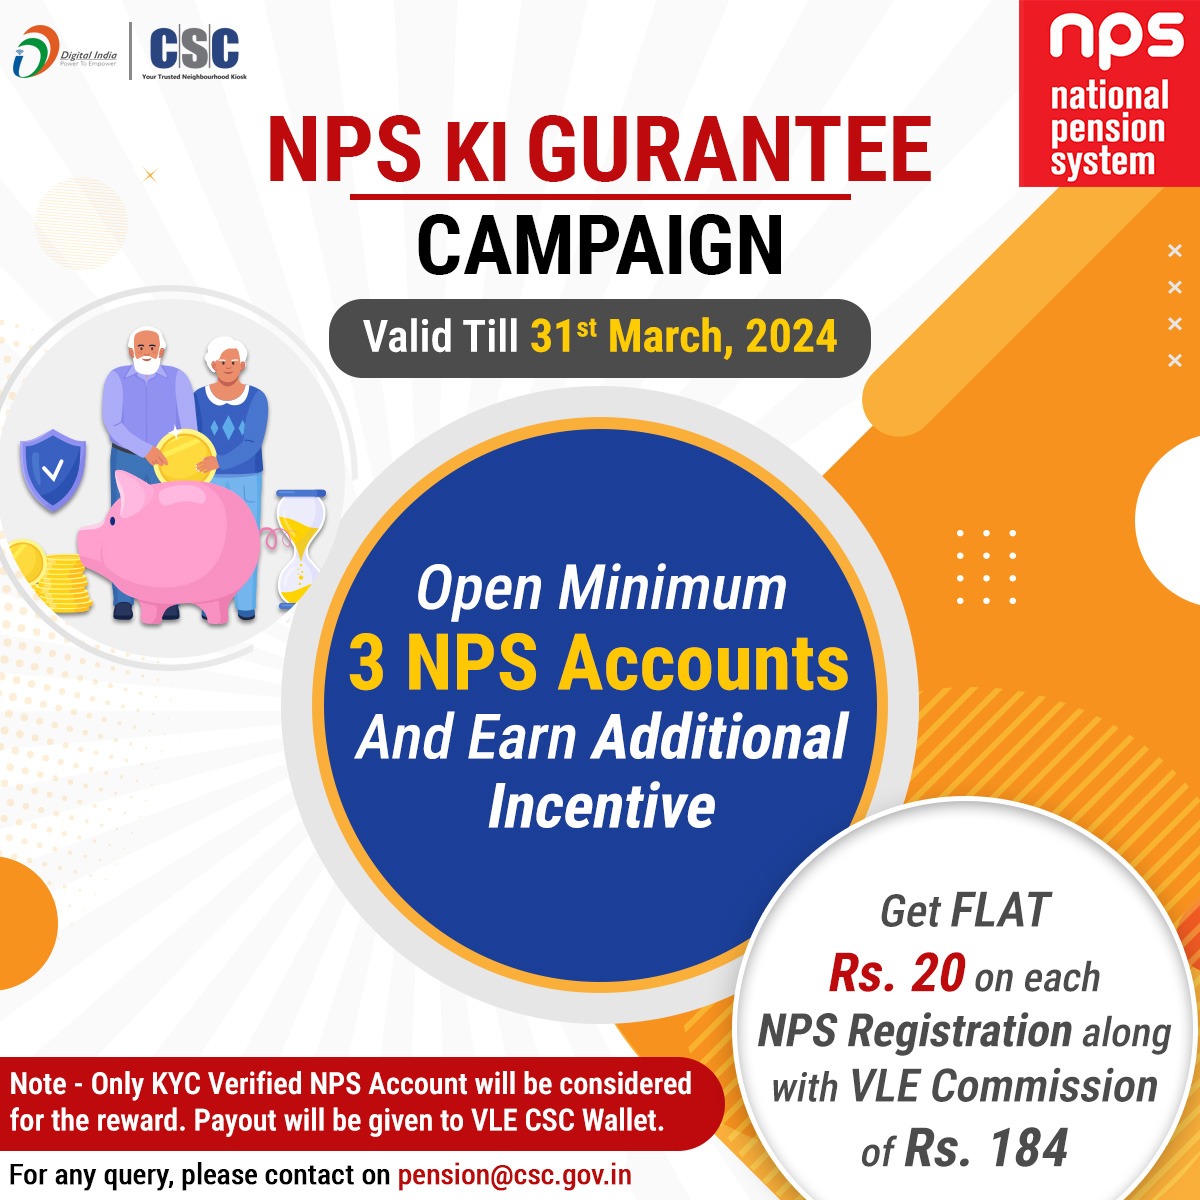 NPS Ki Guarantee Campaign... Open a Minimum 3 #NPS Accounts & Earn Additional Incentives... An incentive of Rs. 20 will be given to VLE on each NPS Registration in addition to the regular VLE Commission i.e. Rs. 184. For any query, contact on pension@csc.gov.in